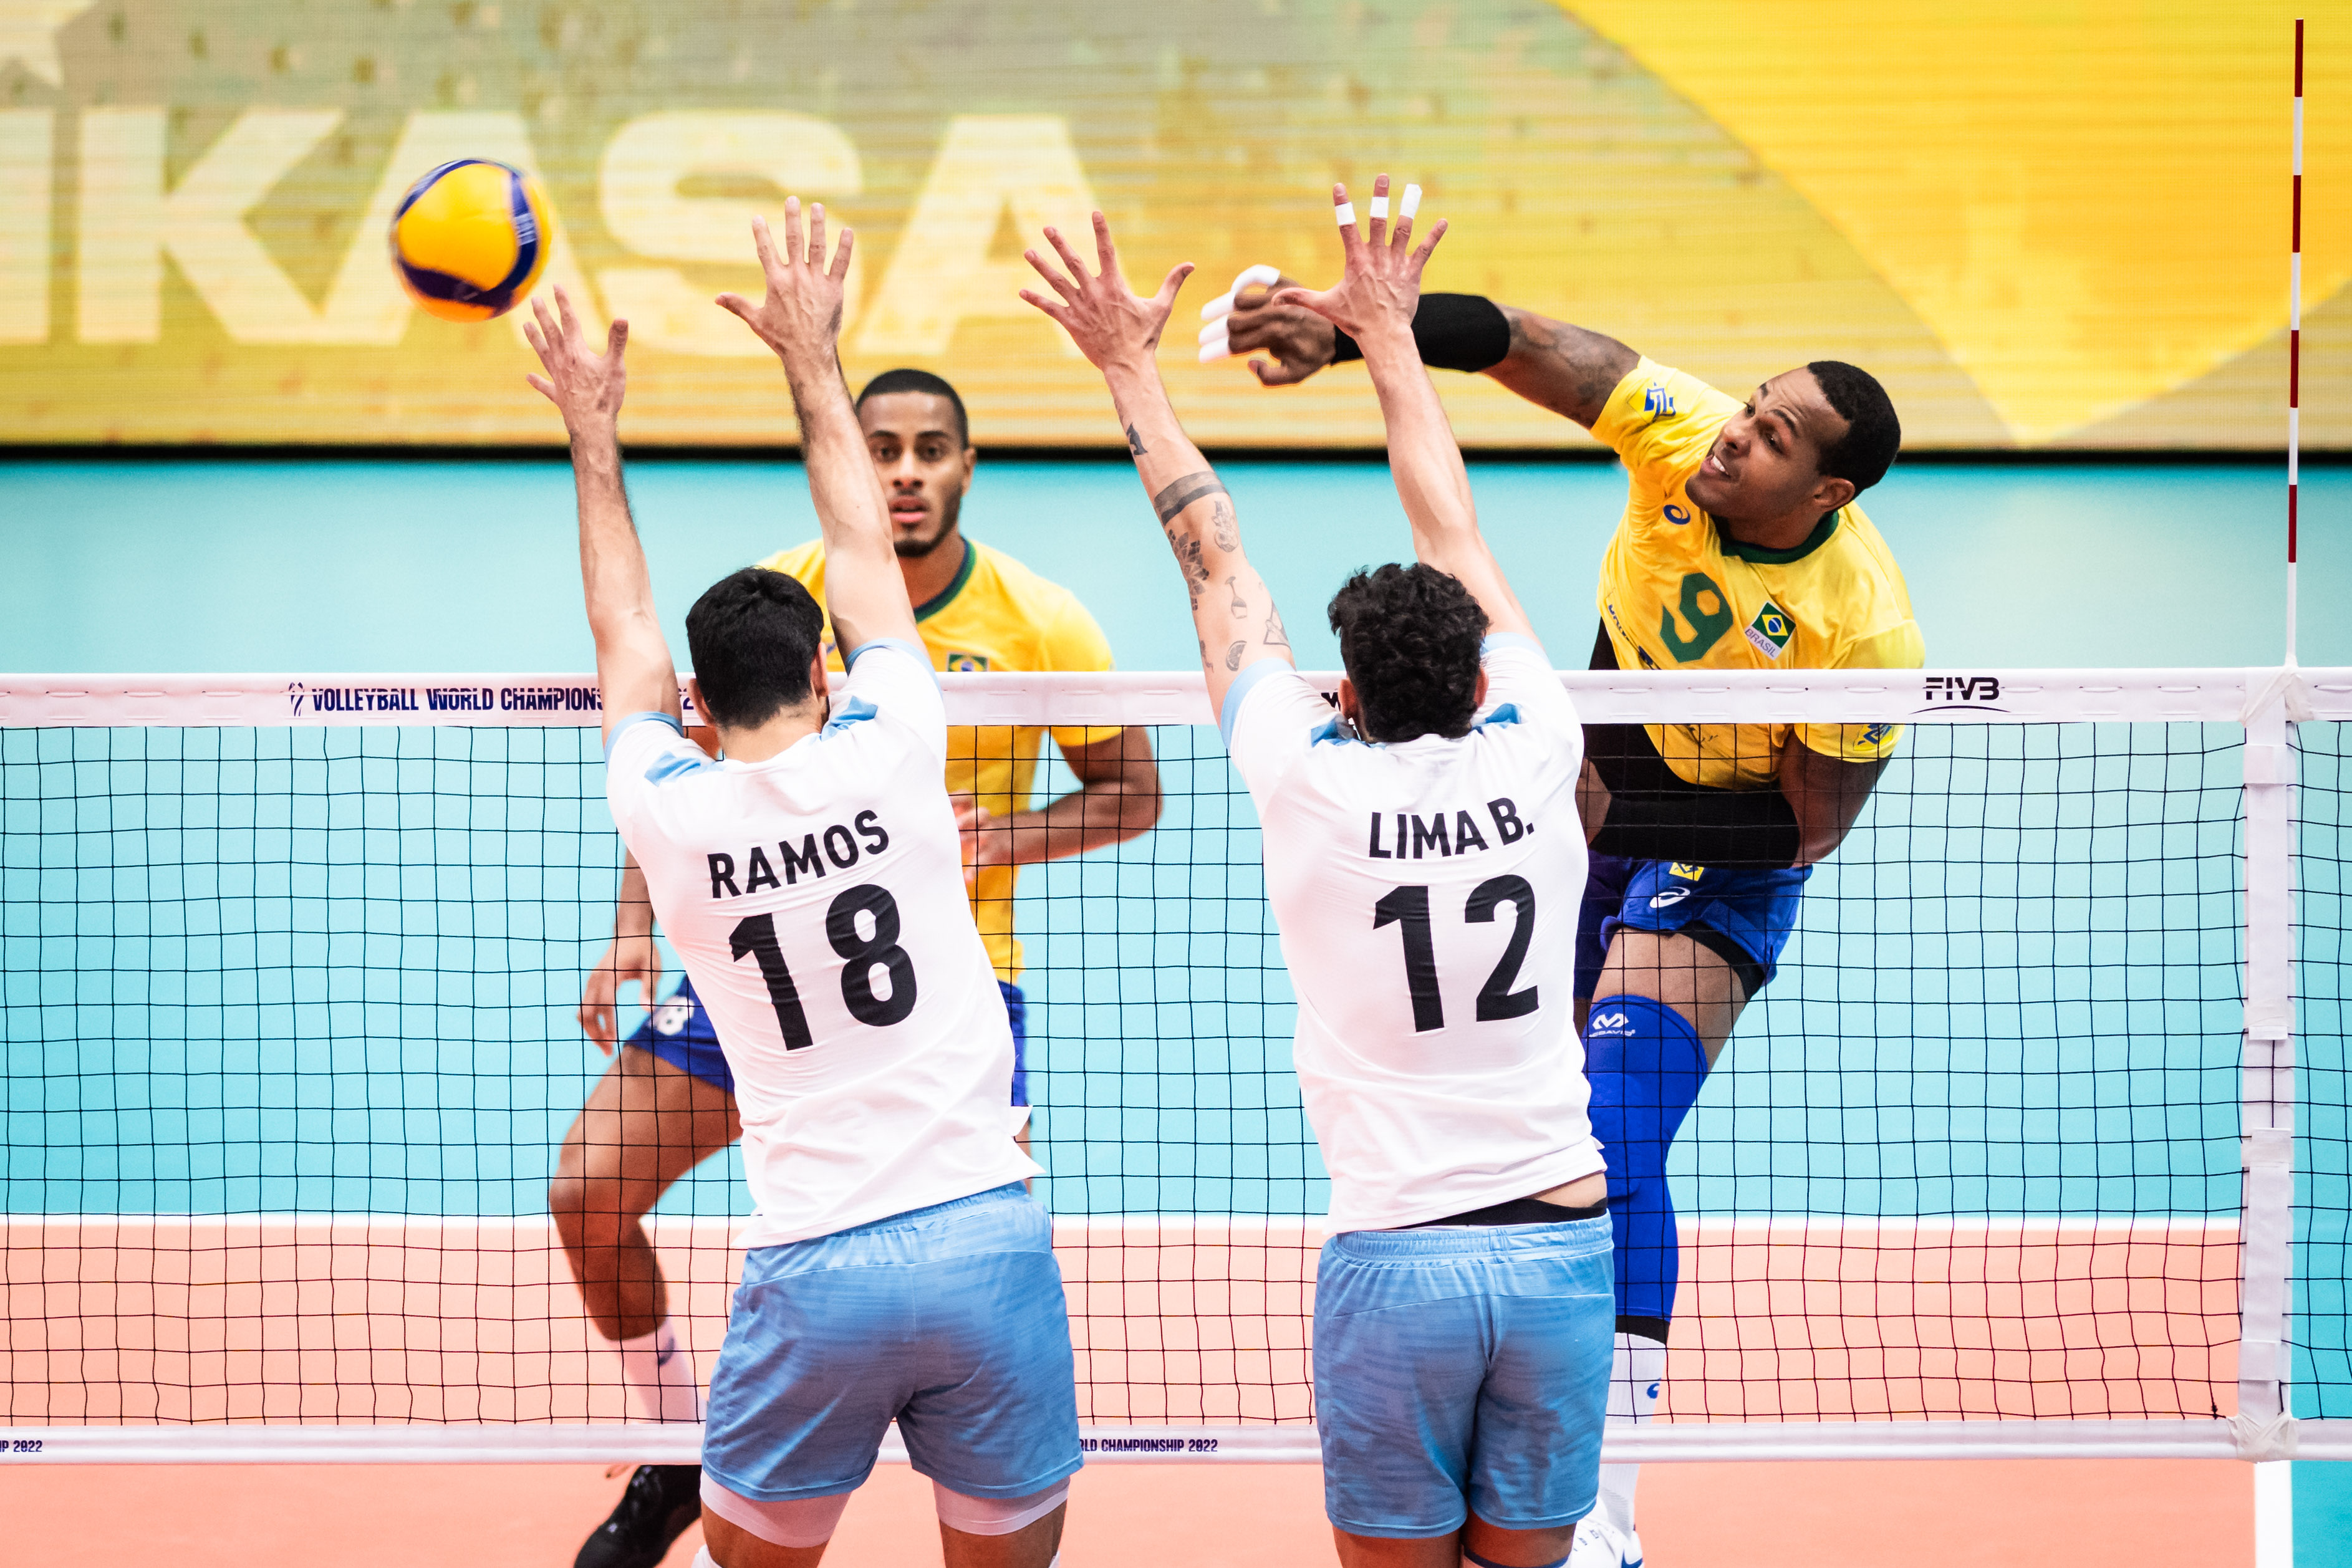 Leal powers Brazil through to semifinal | volleyballworld.com